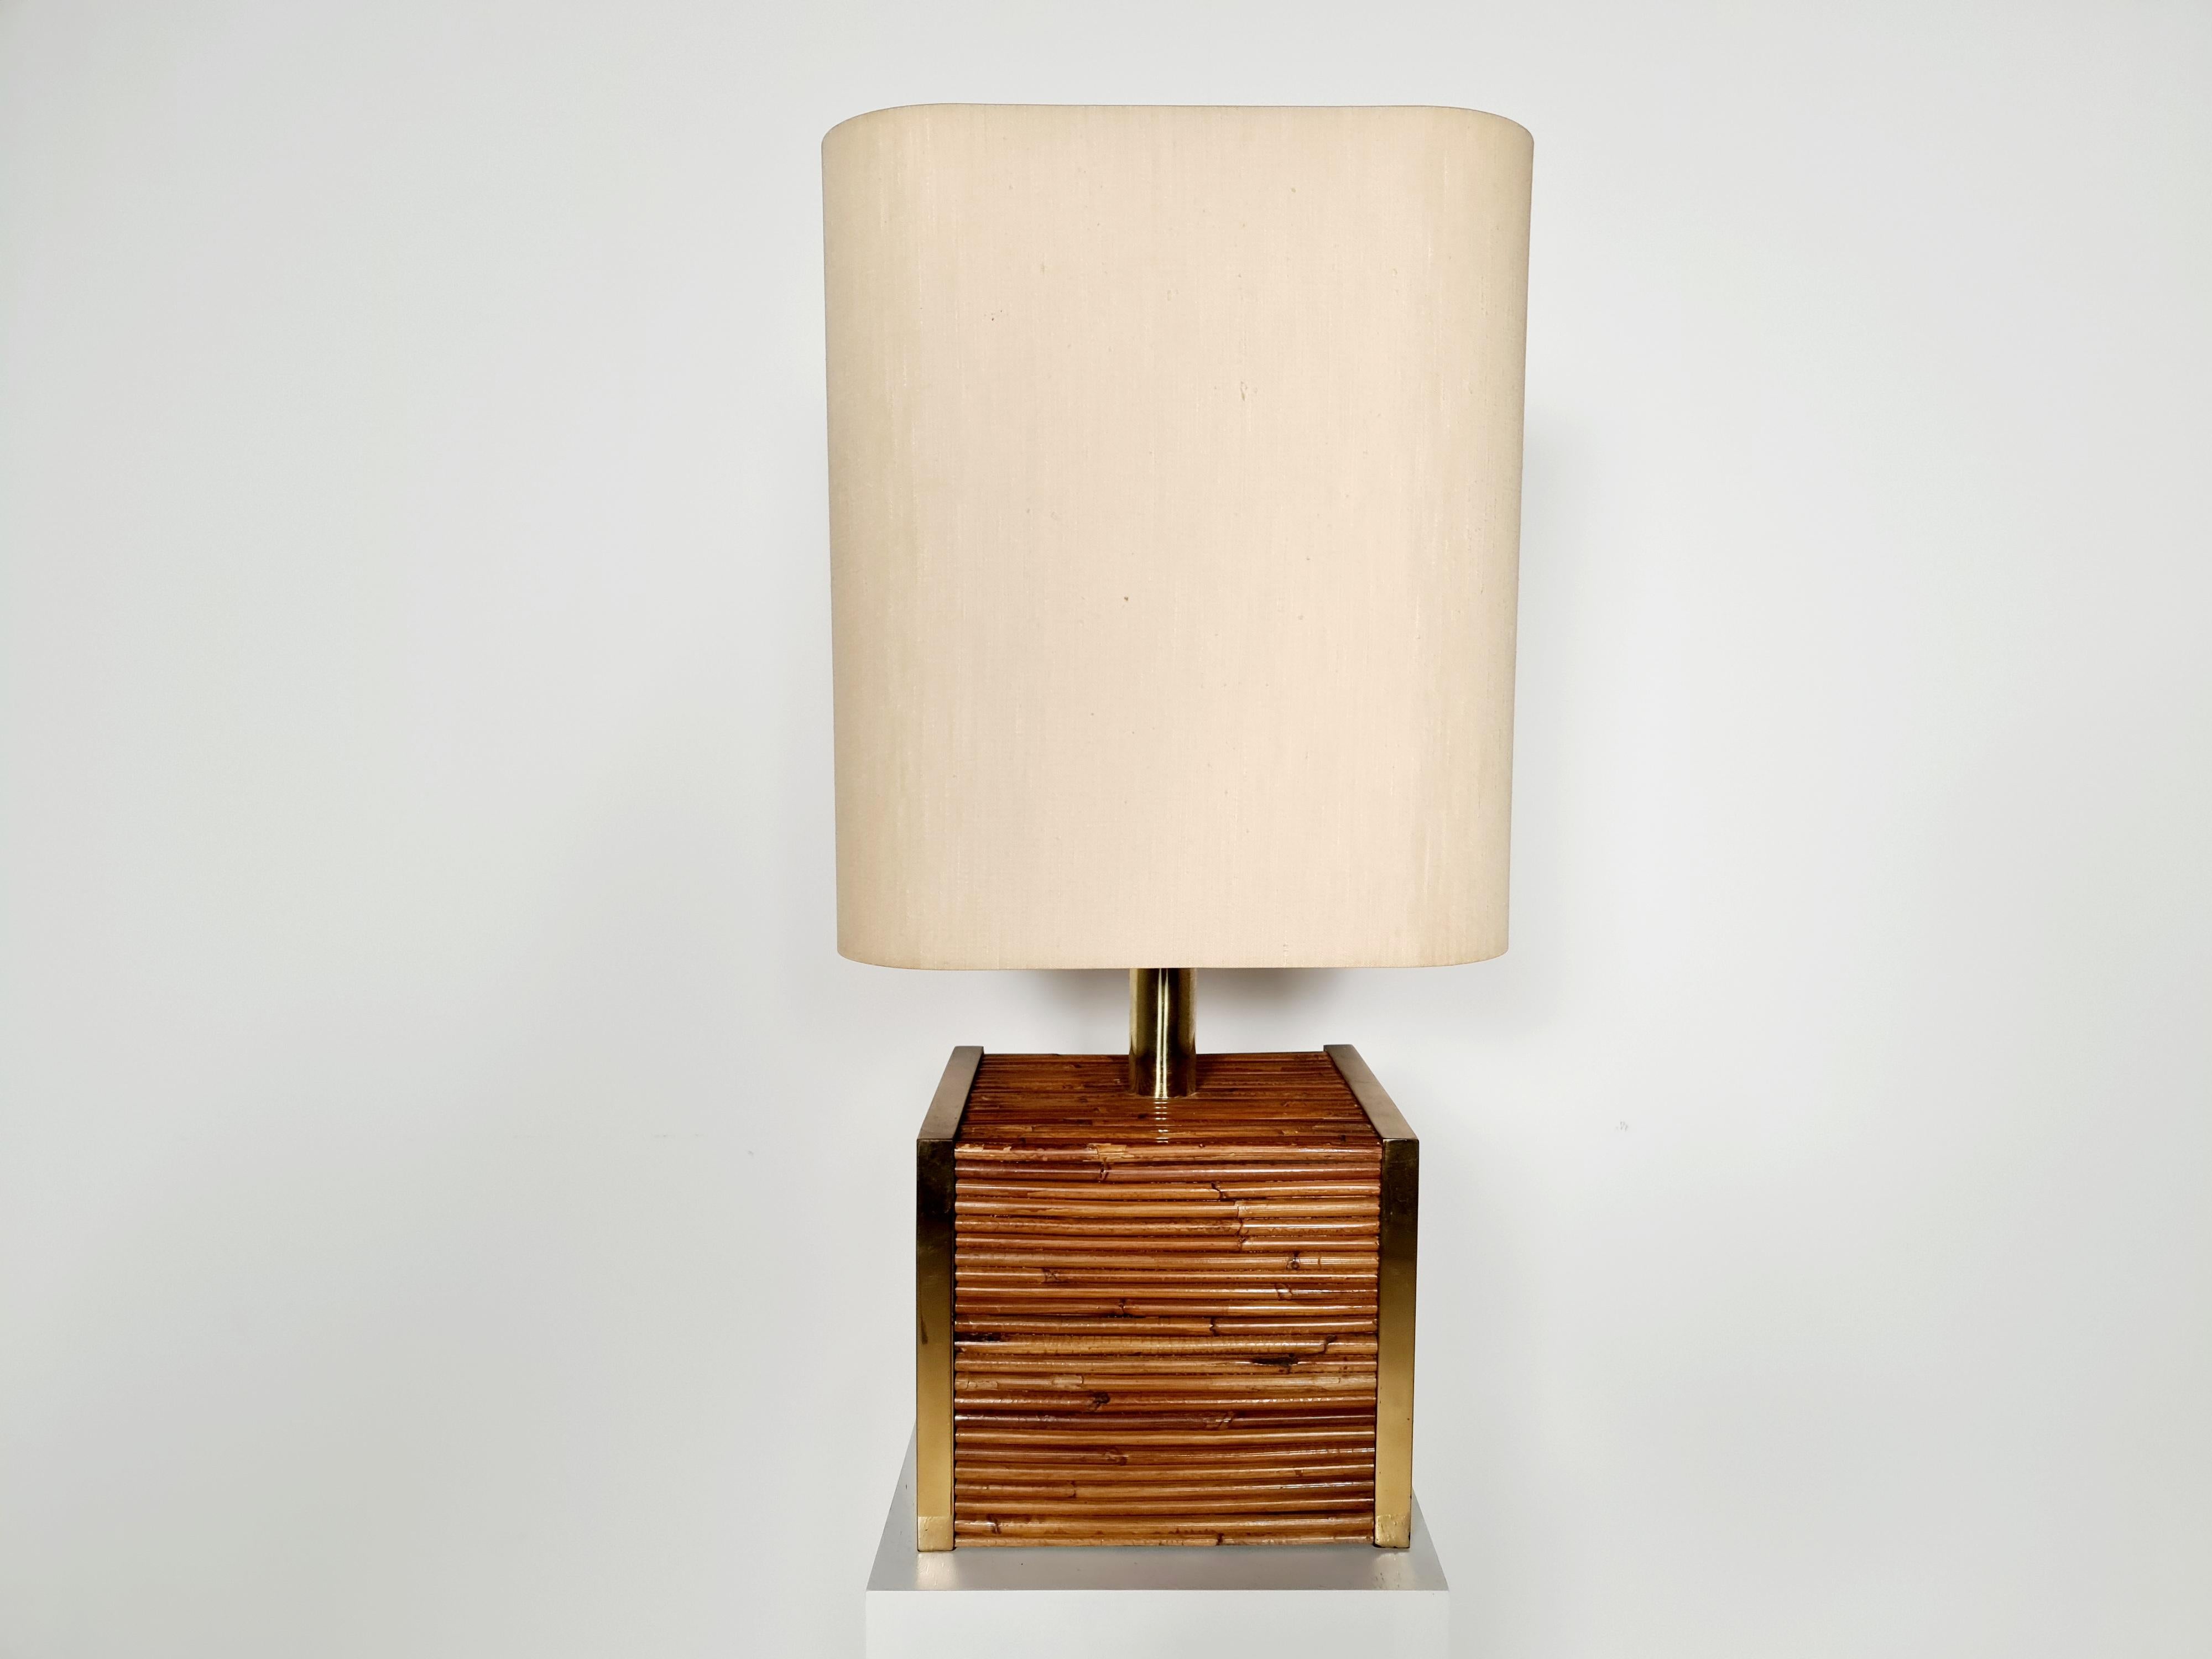 Beautiful table lamp with brass details in the style of Vivai del Sud. The lamp is designed and made by Traversi Milano in the 1970s.